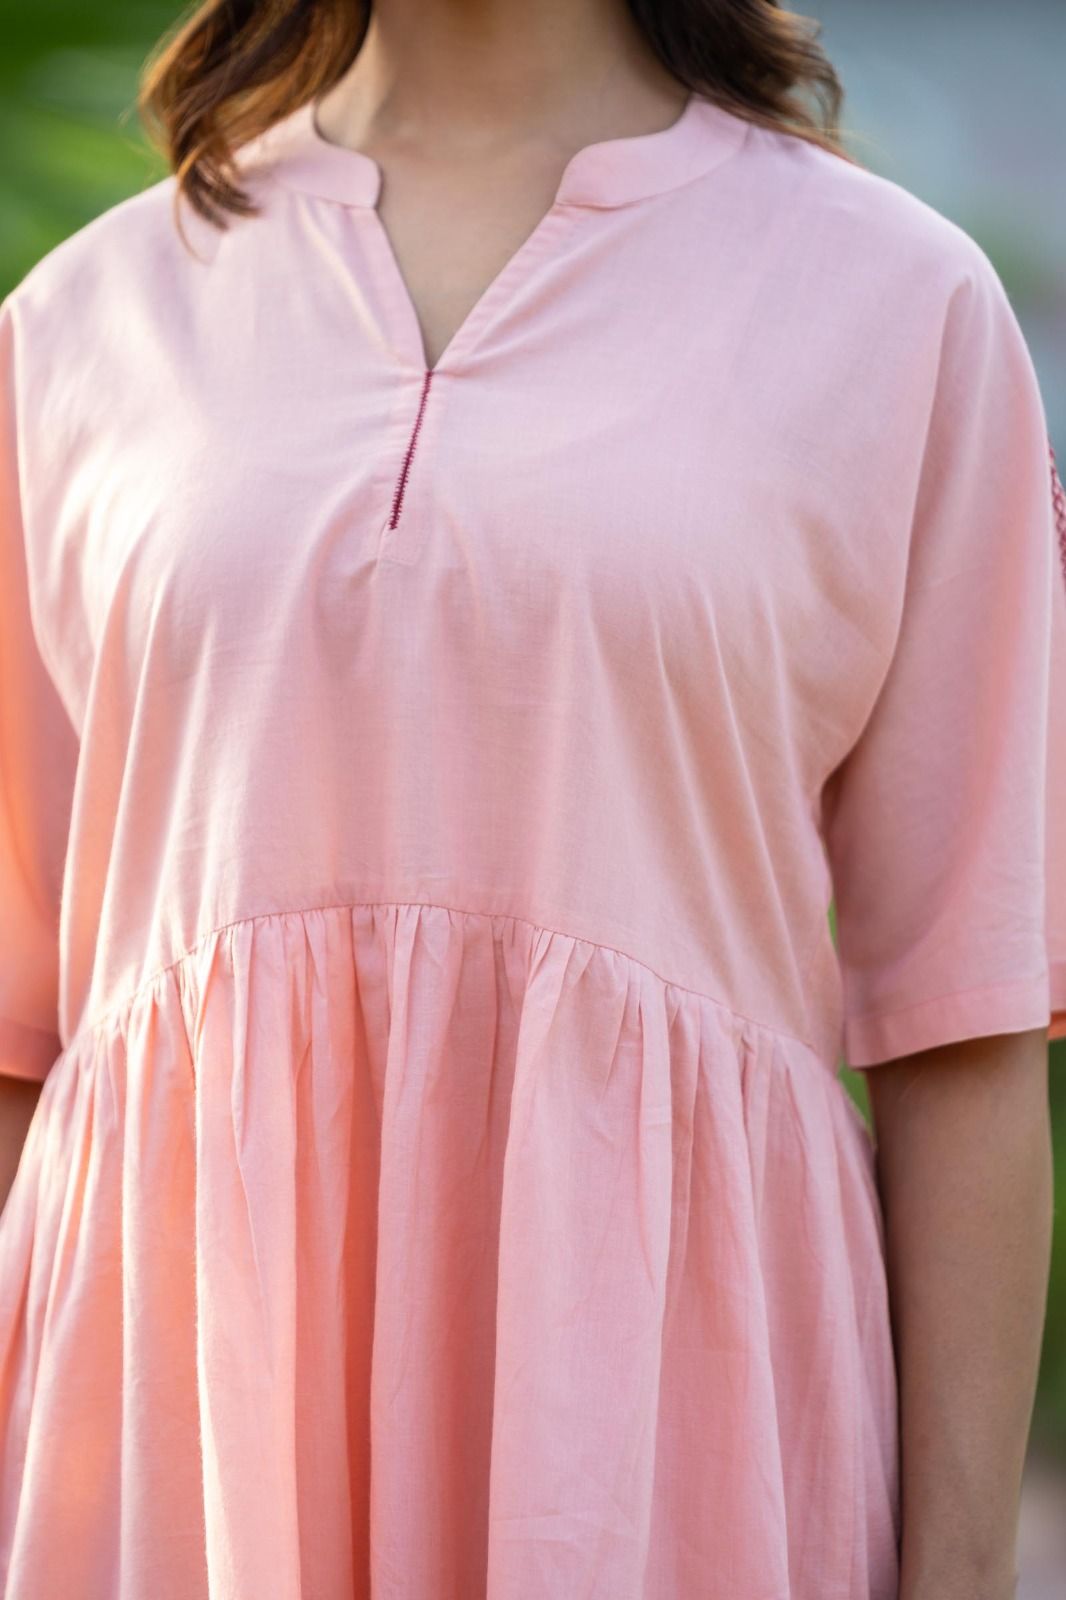 Peach Frock Style Top